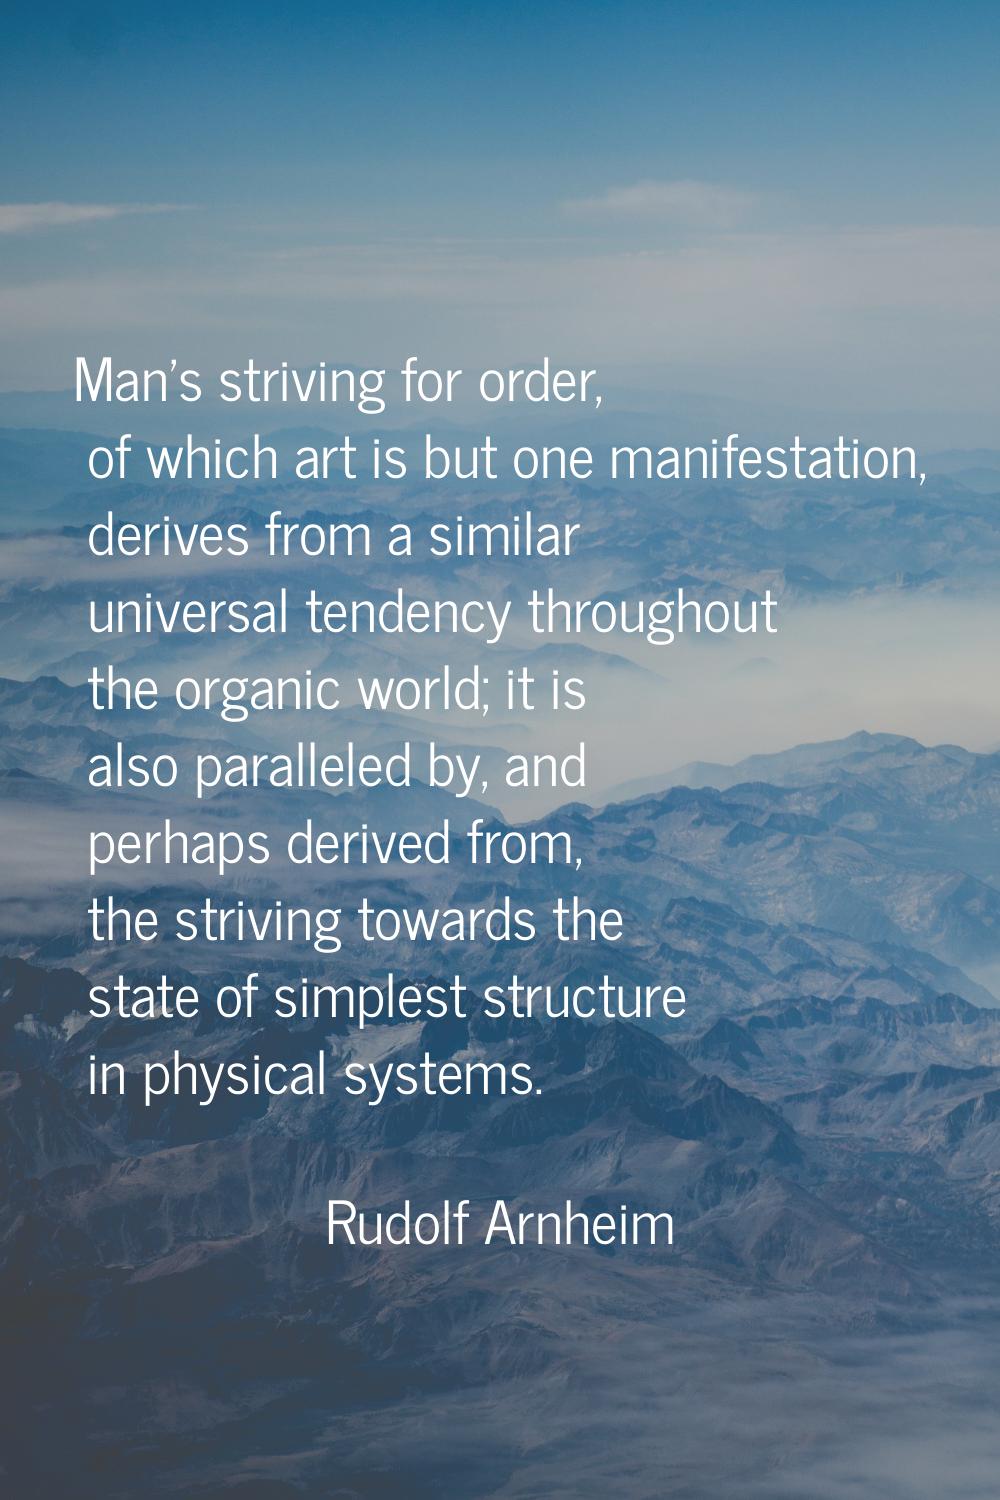 Man's striving for order, of which art is but one manifestation, derives from a similar universal t